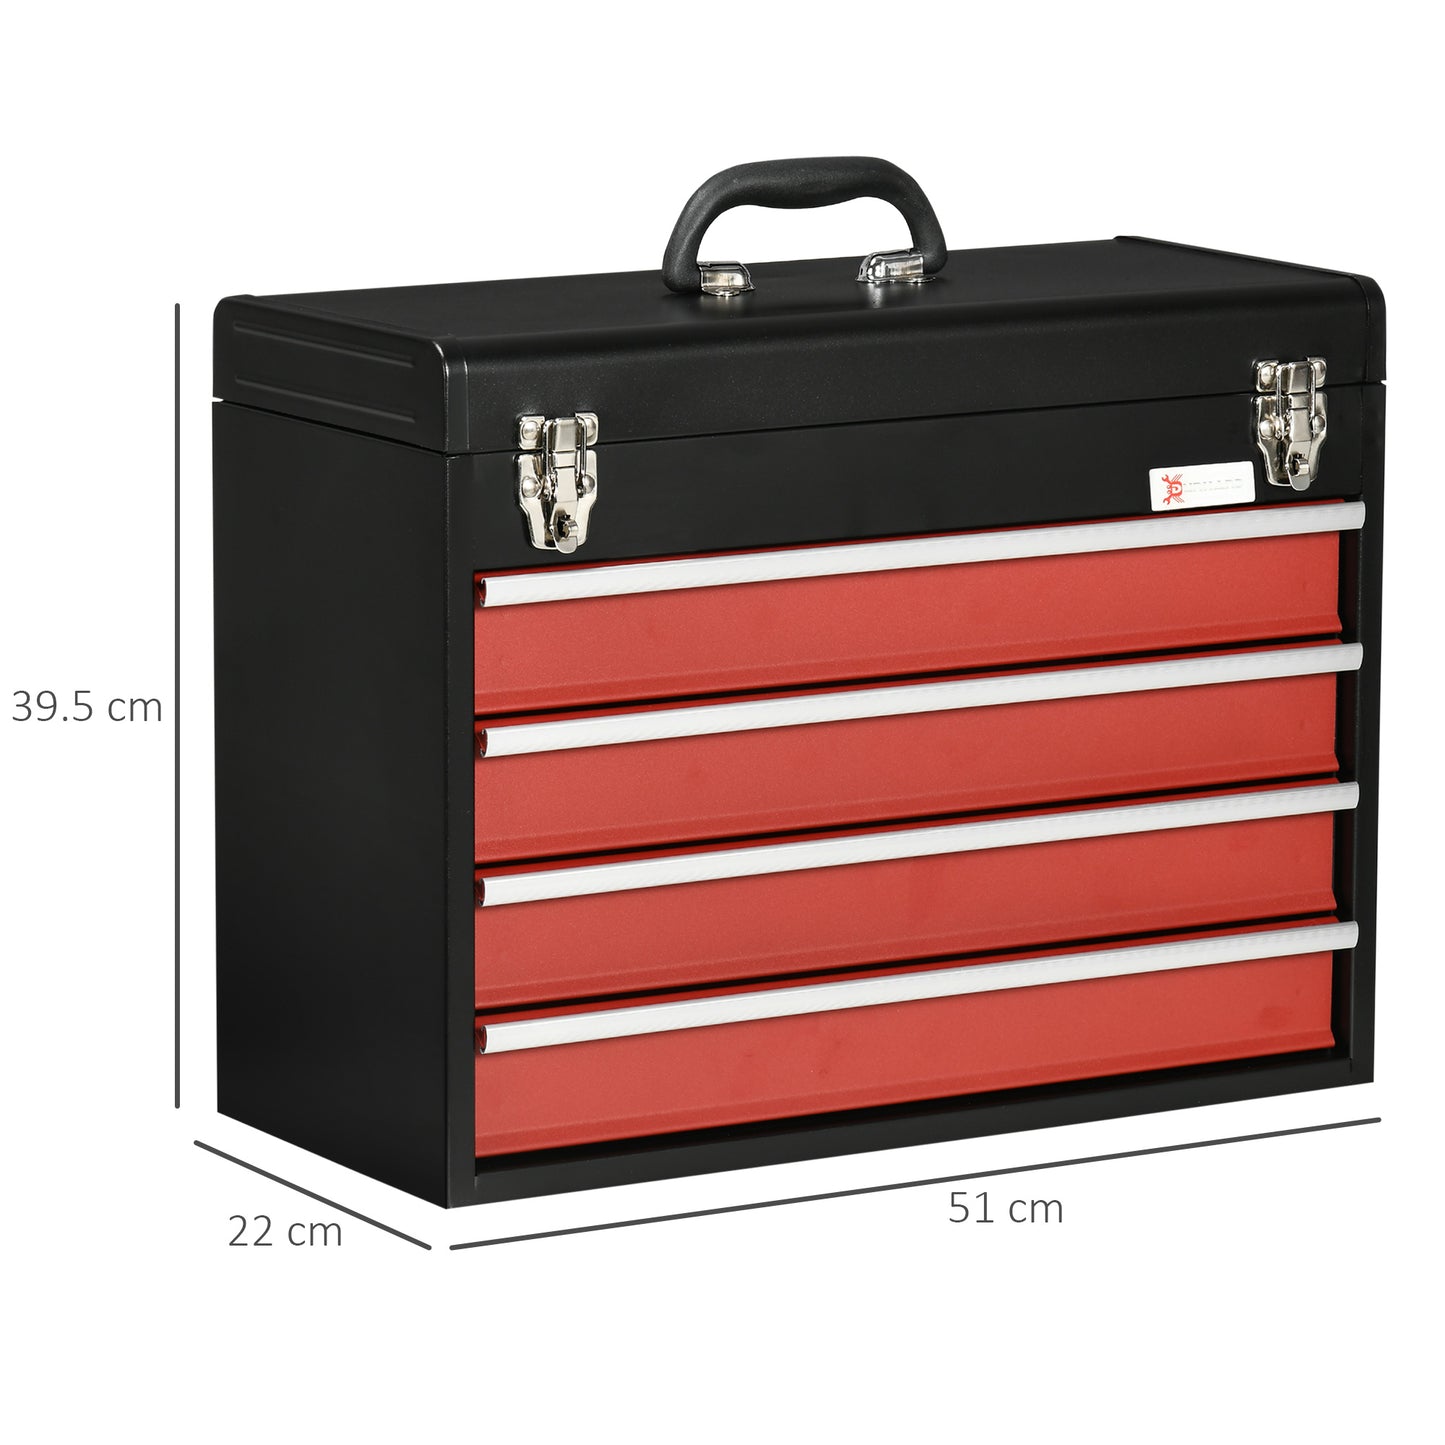 DURHAND 4 Drawer Tool Chest, Lockable Metal Tool Box with Ball Bearing Runners, Portable Toolbox, 510mm x 220mm x 395mm